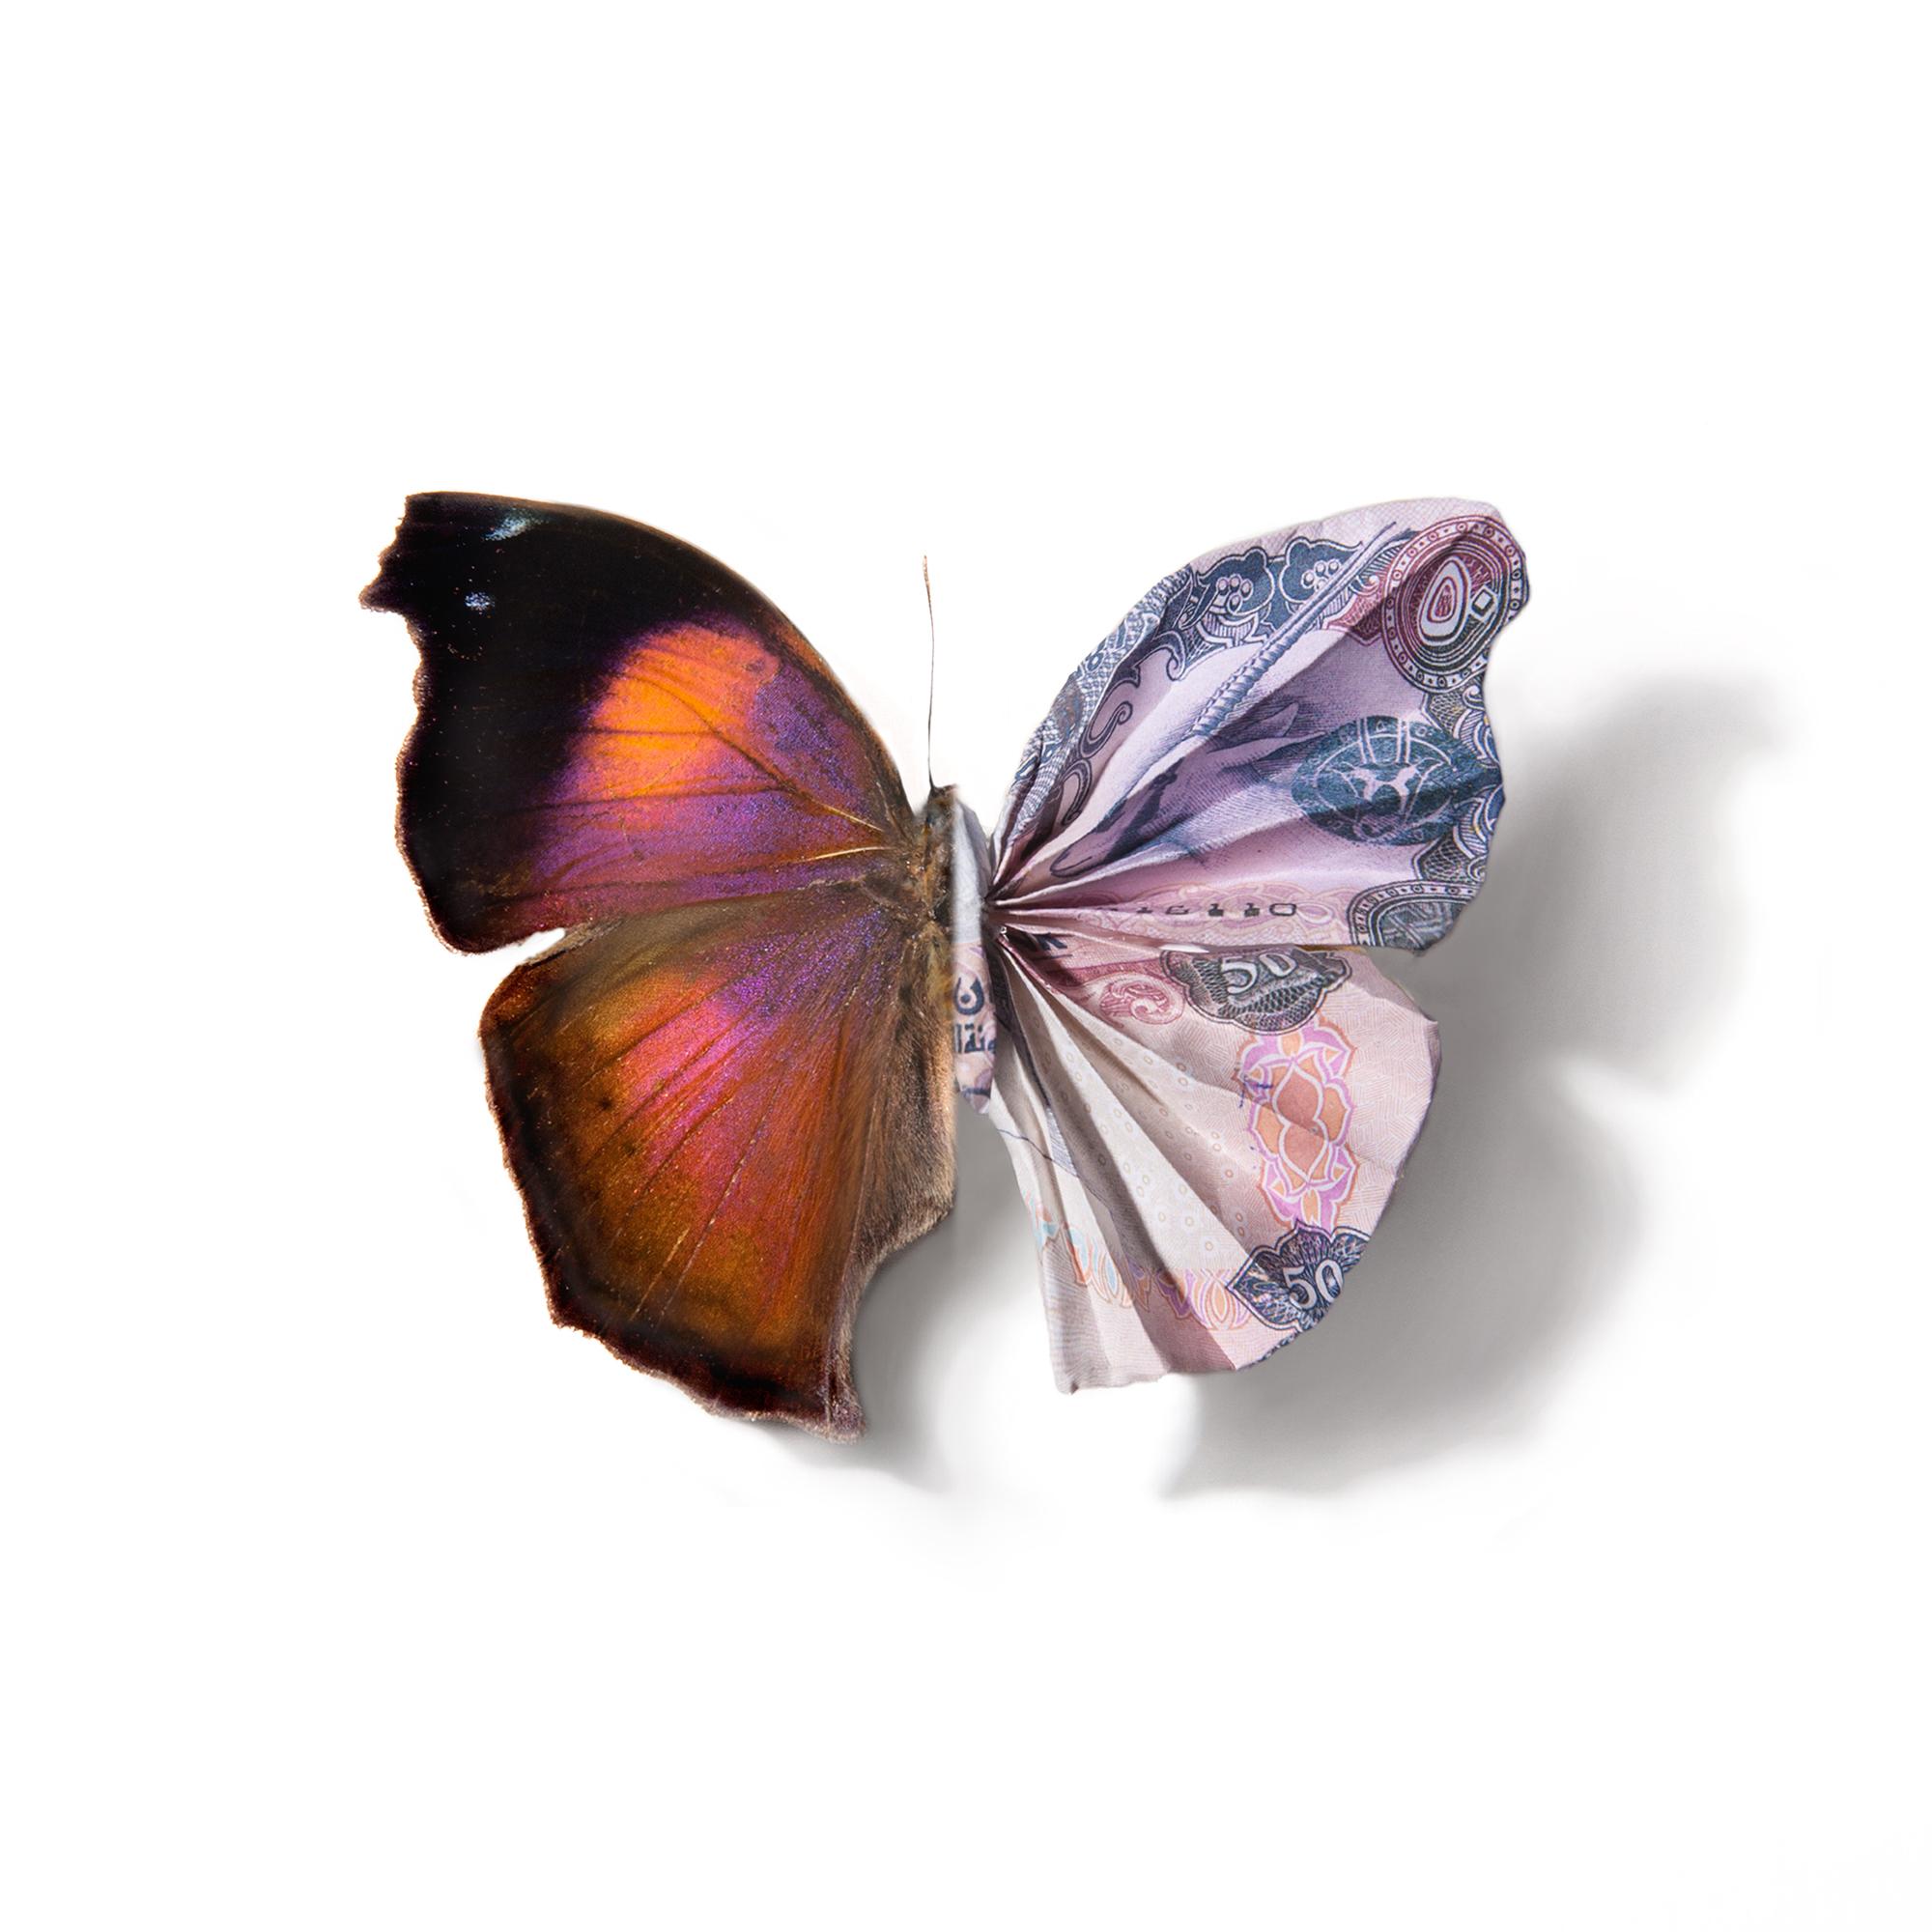 Anna Tas Still-Life Photograph - "A Thing of Beauty #9 (Salamis)" Lenticular Print, Butterfly, Currency Motif